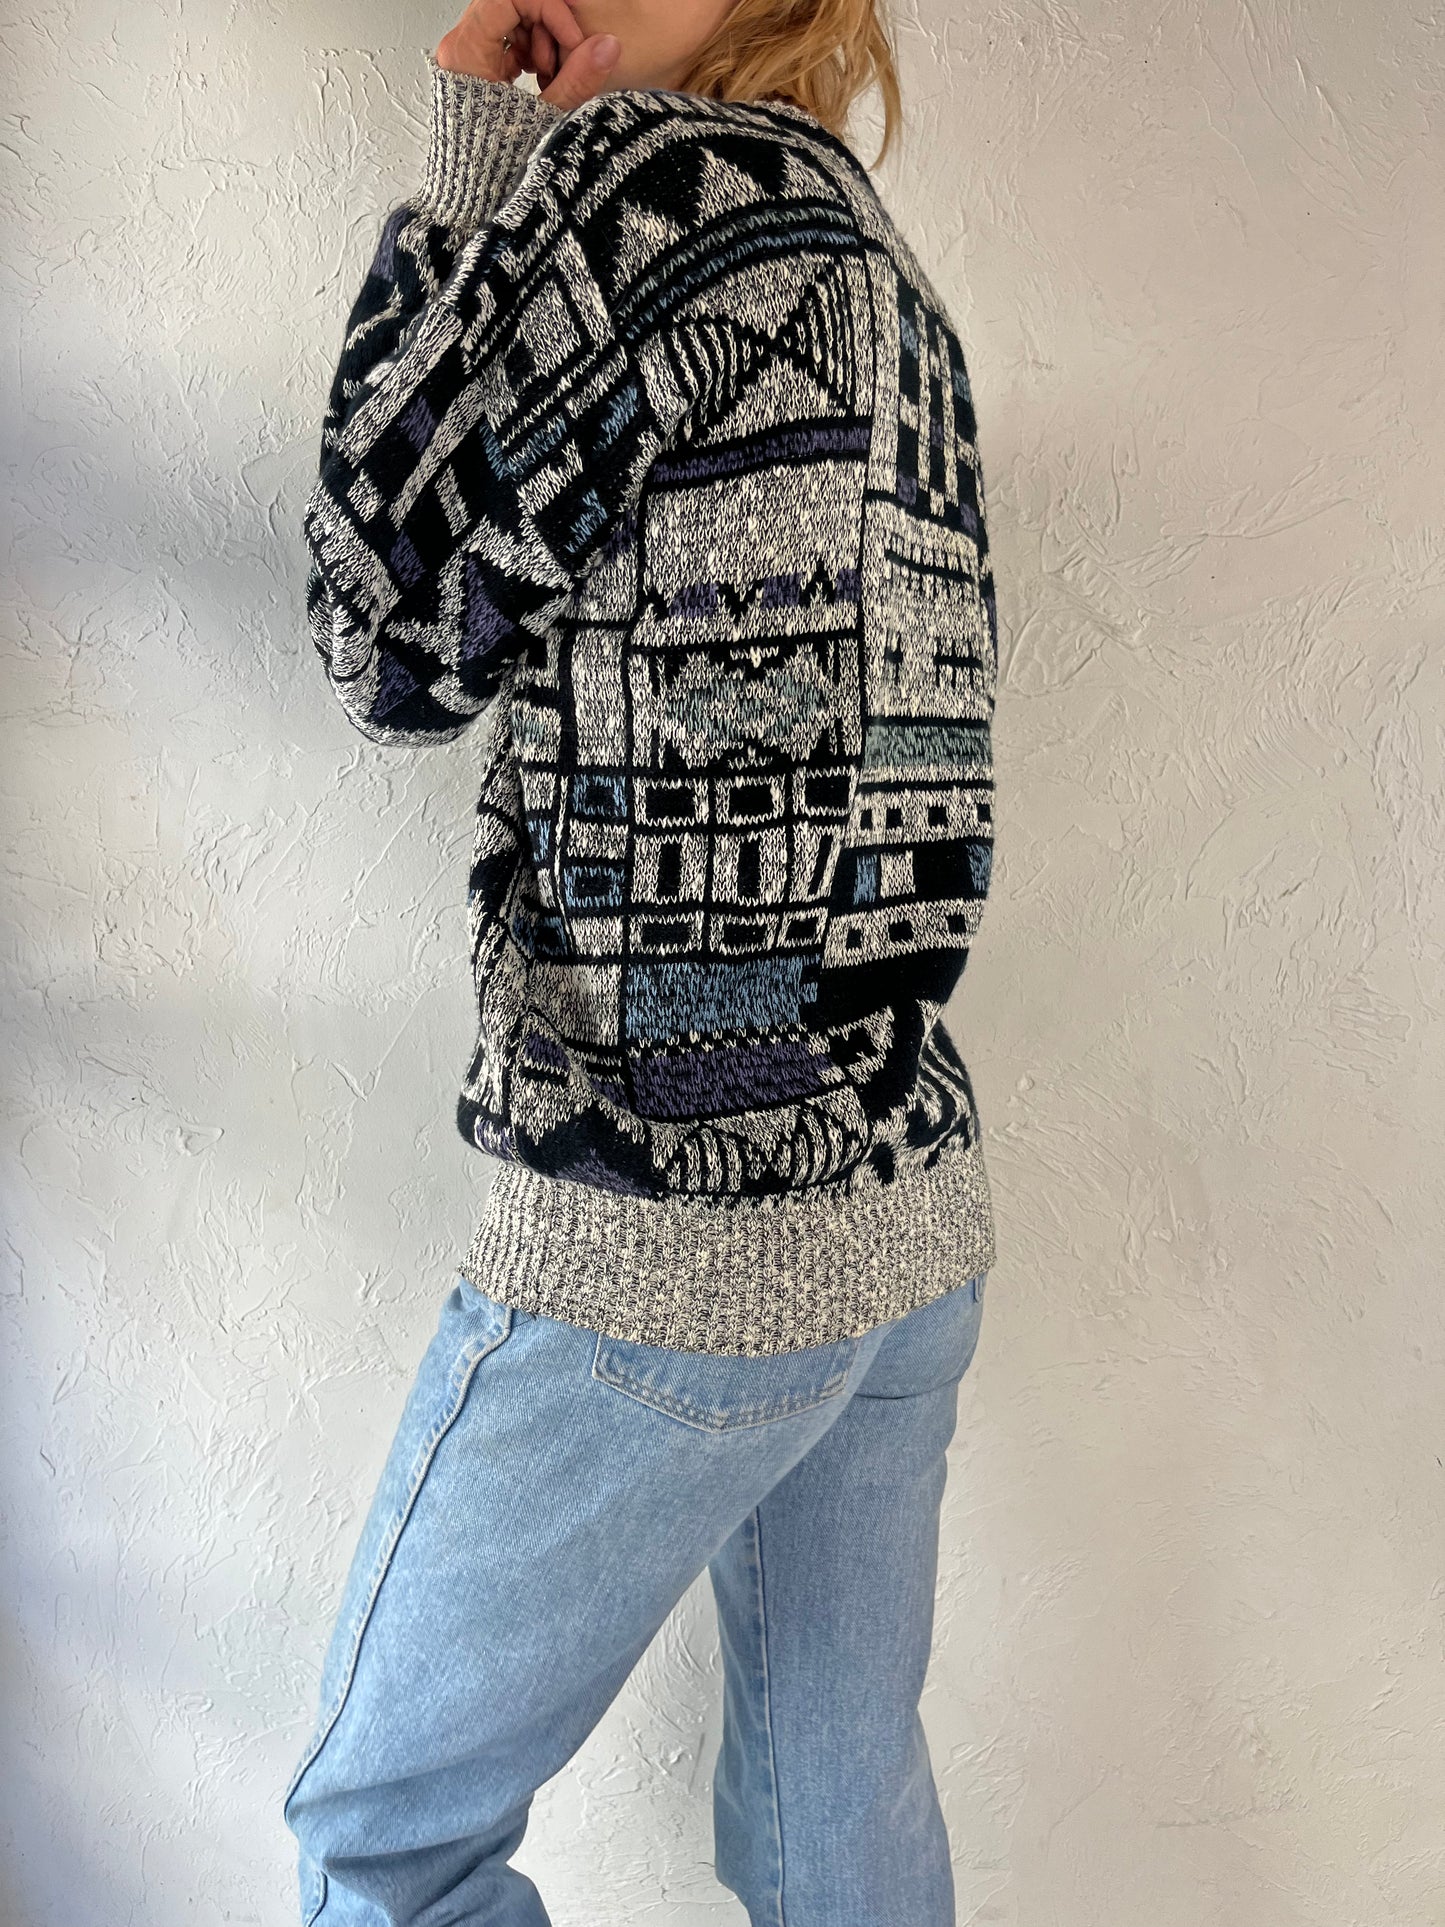 90s 'Expressions International' Abstract Knit Sweater / Medium